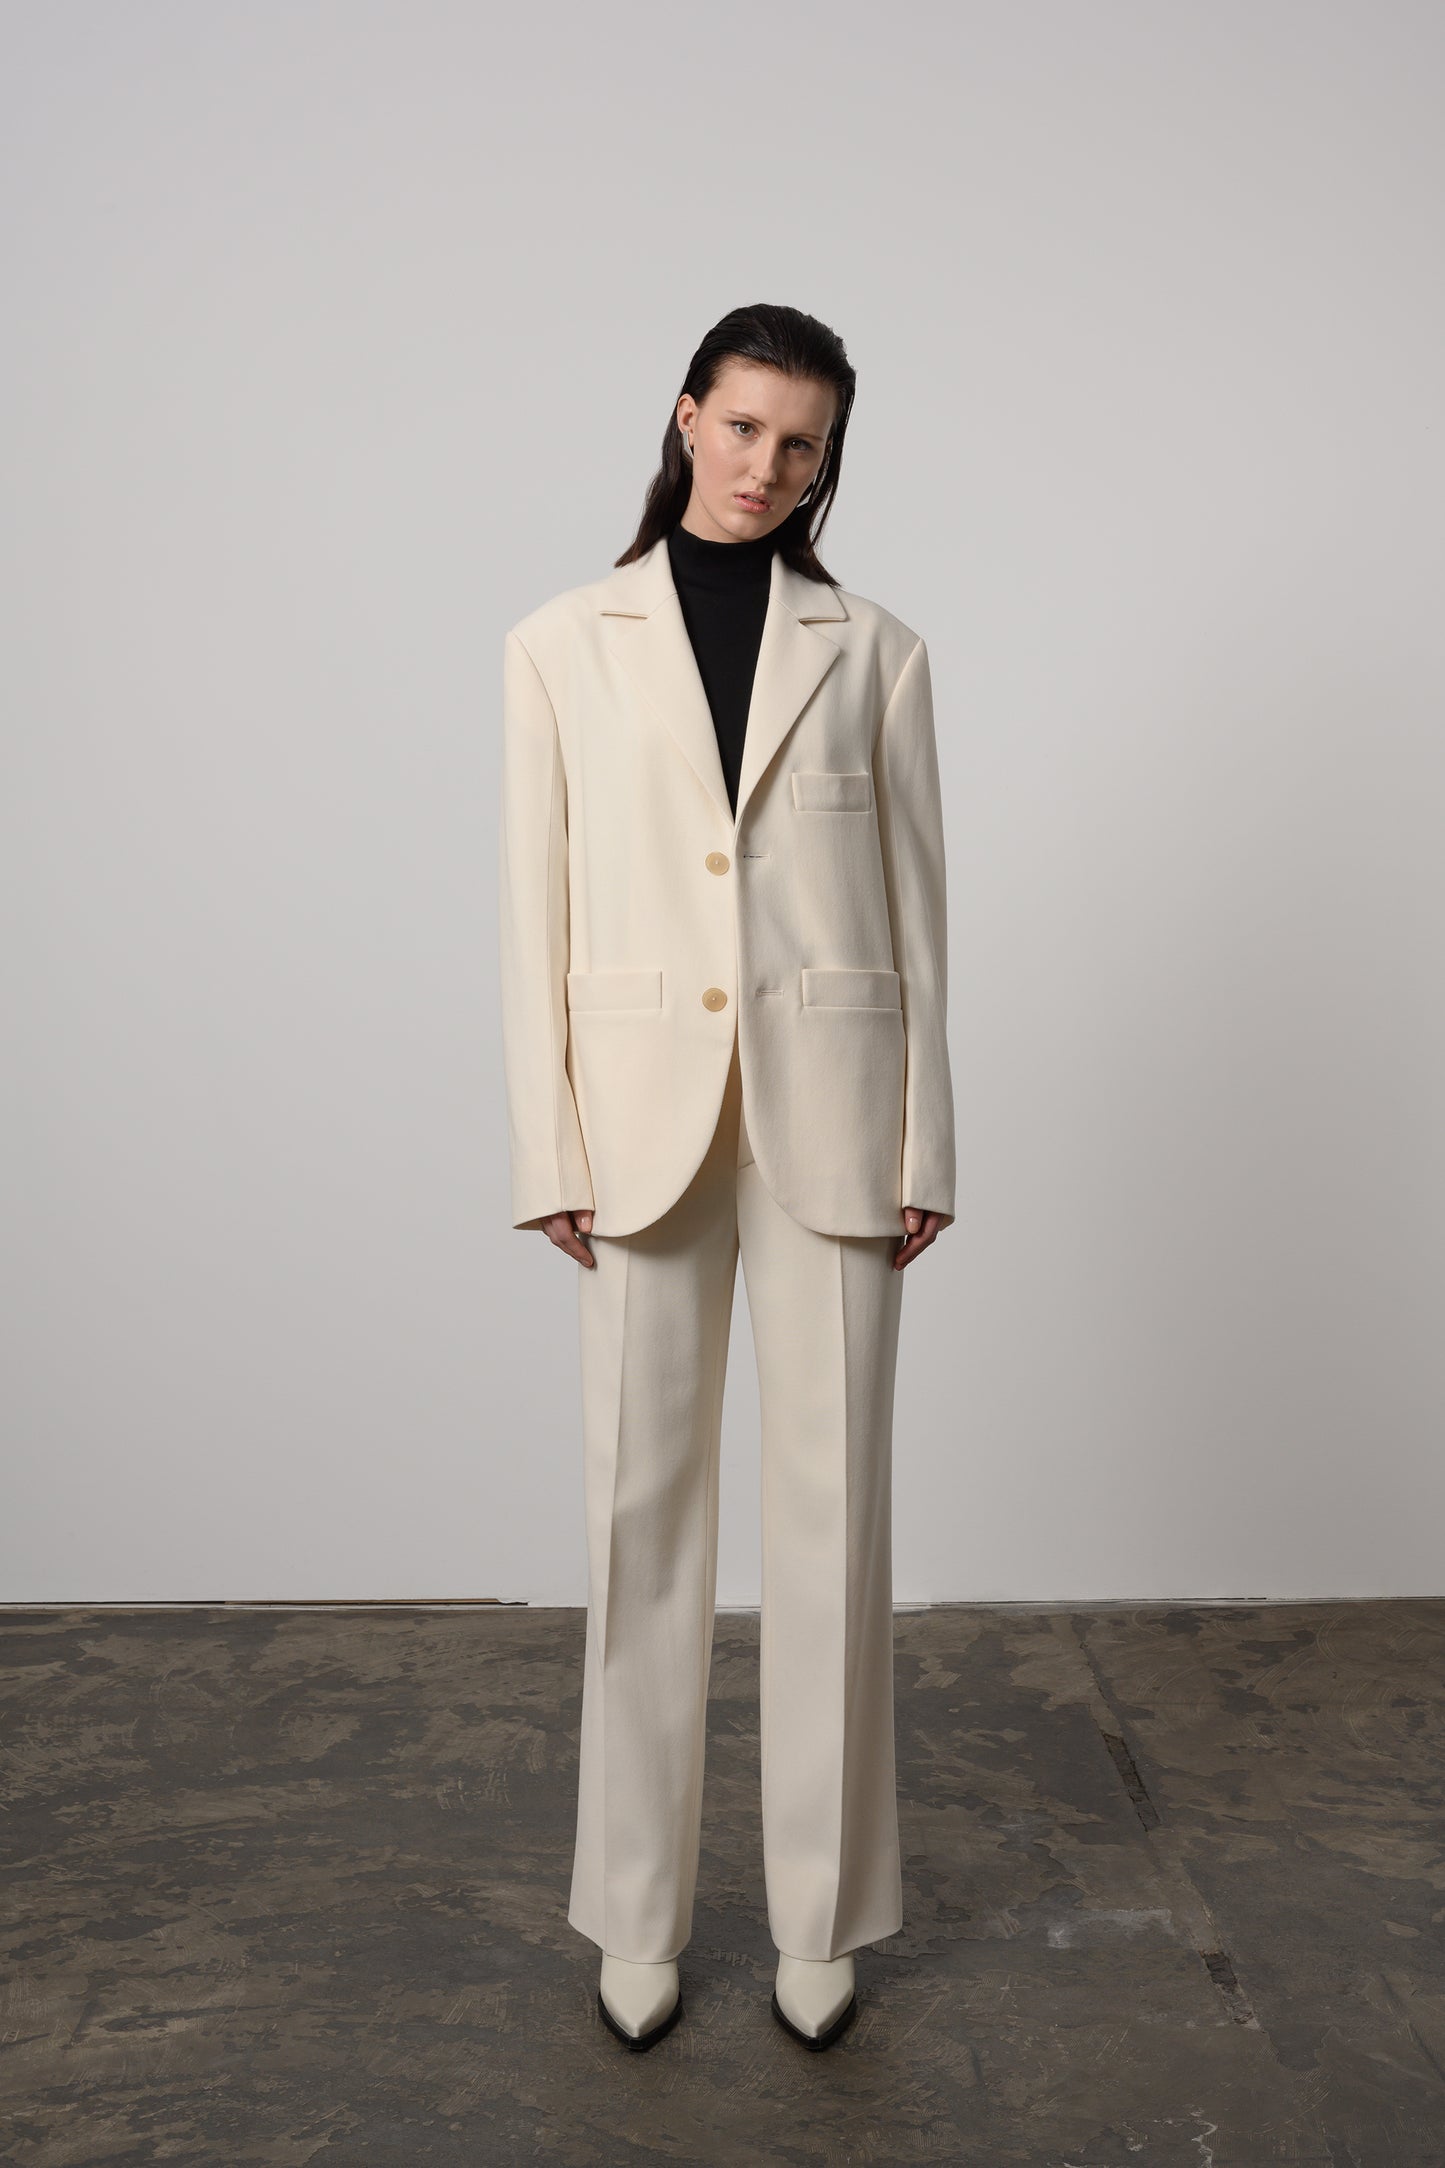 Model Zoe wearing classic off-white oversized unisex blazer made from Italian wool, featuring notched lapels and a double-button closure for a timeless and sophisticated look.